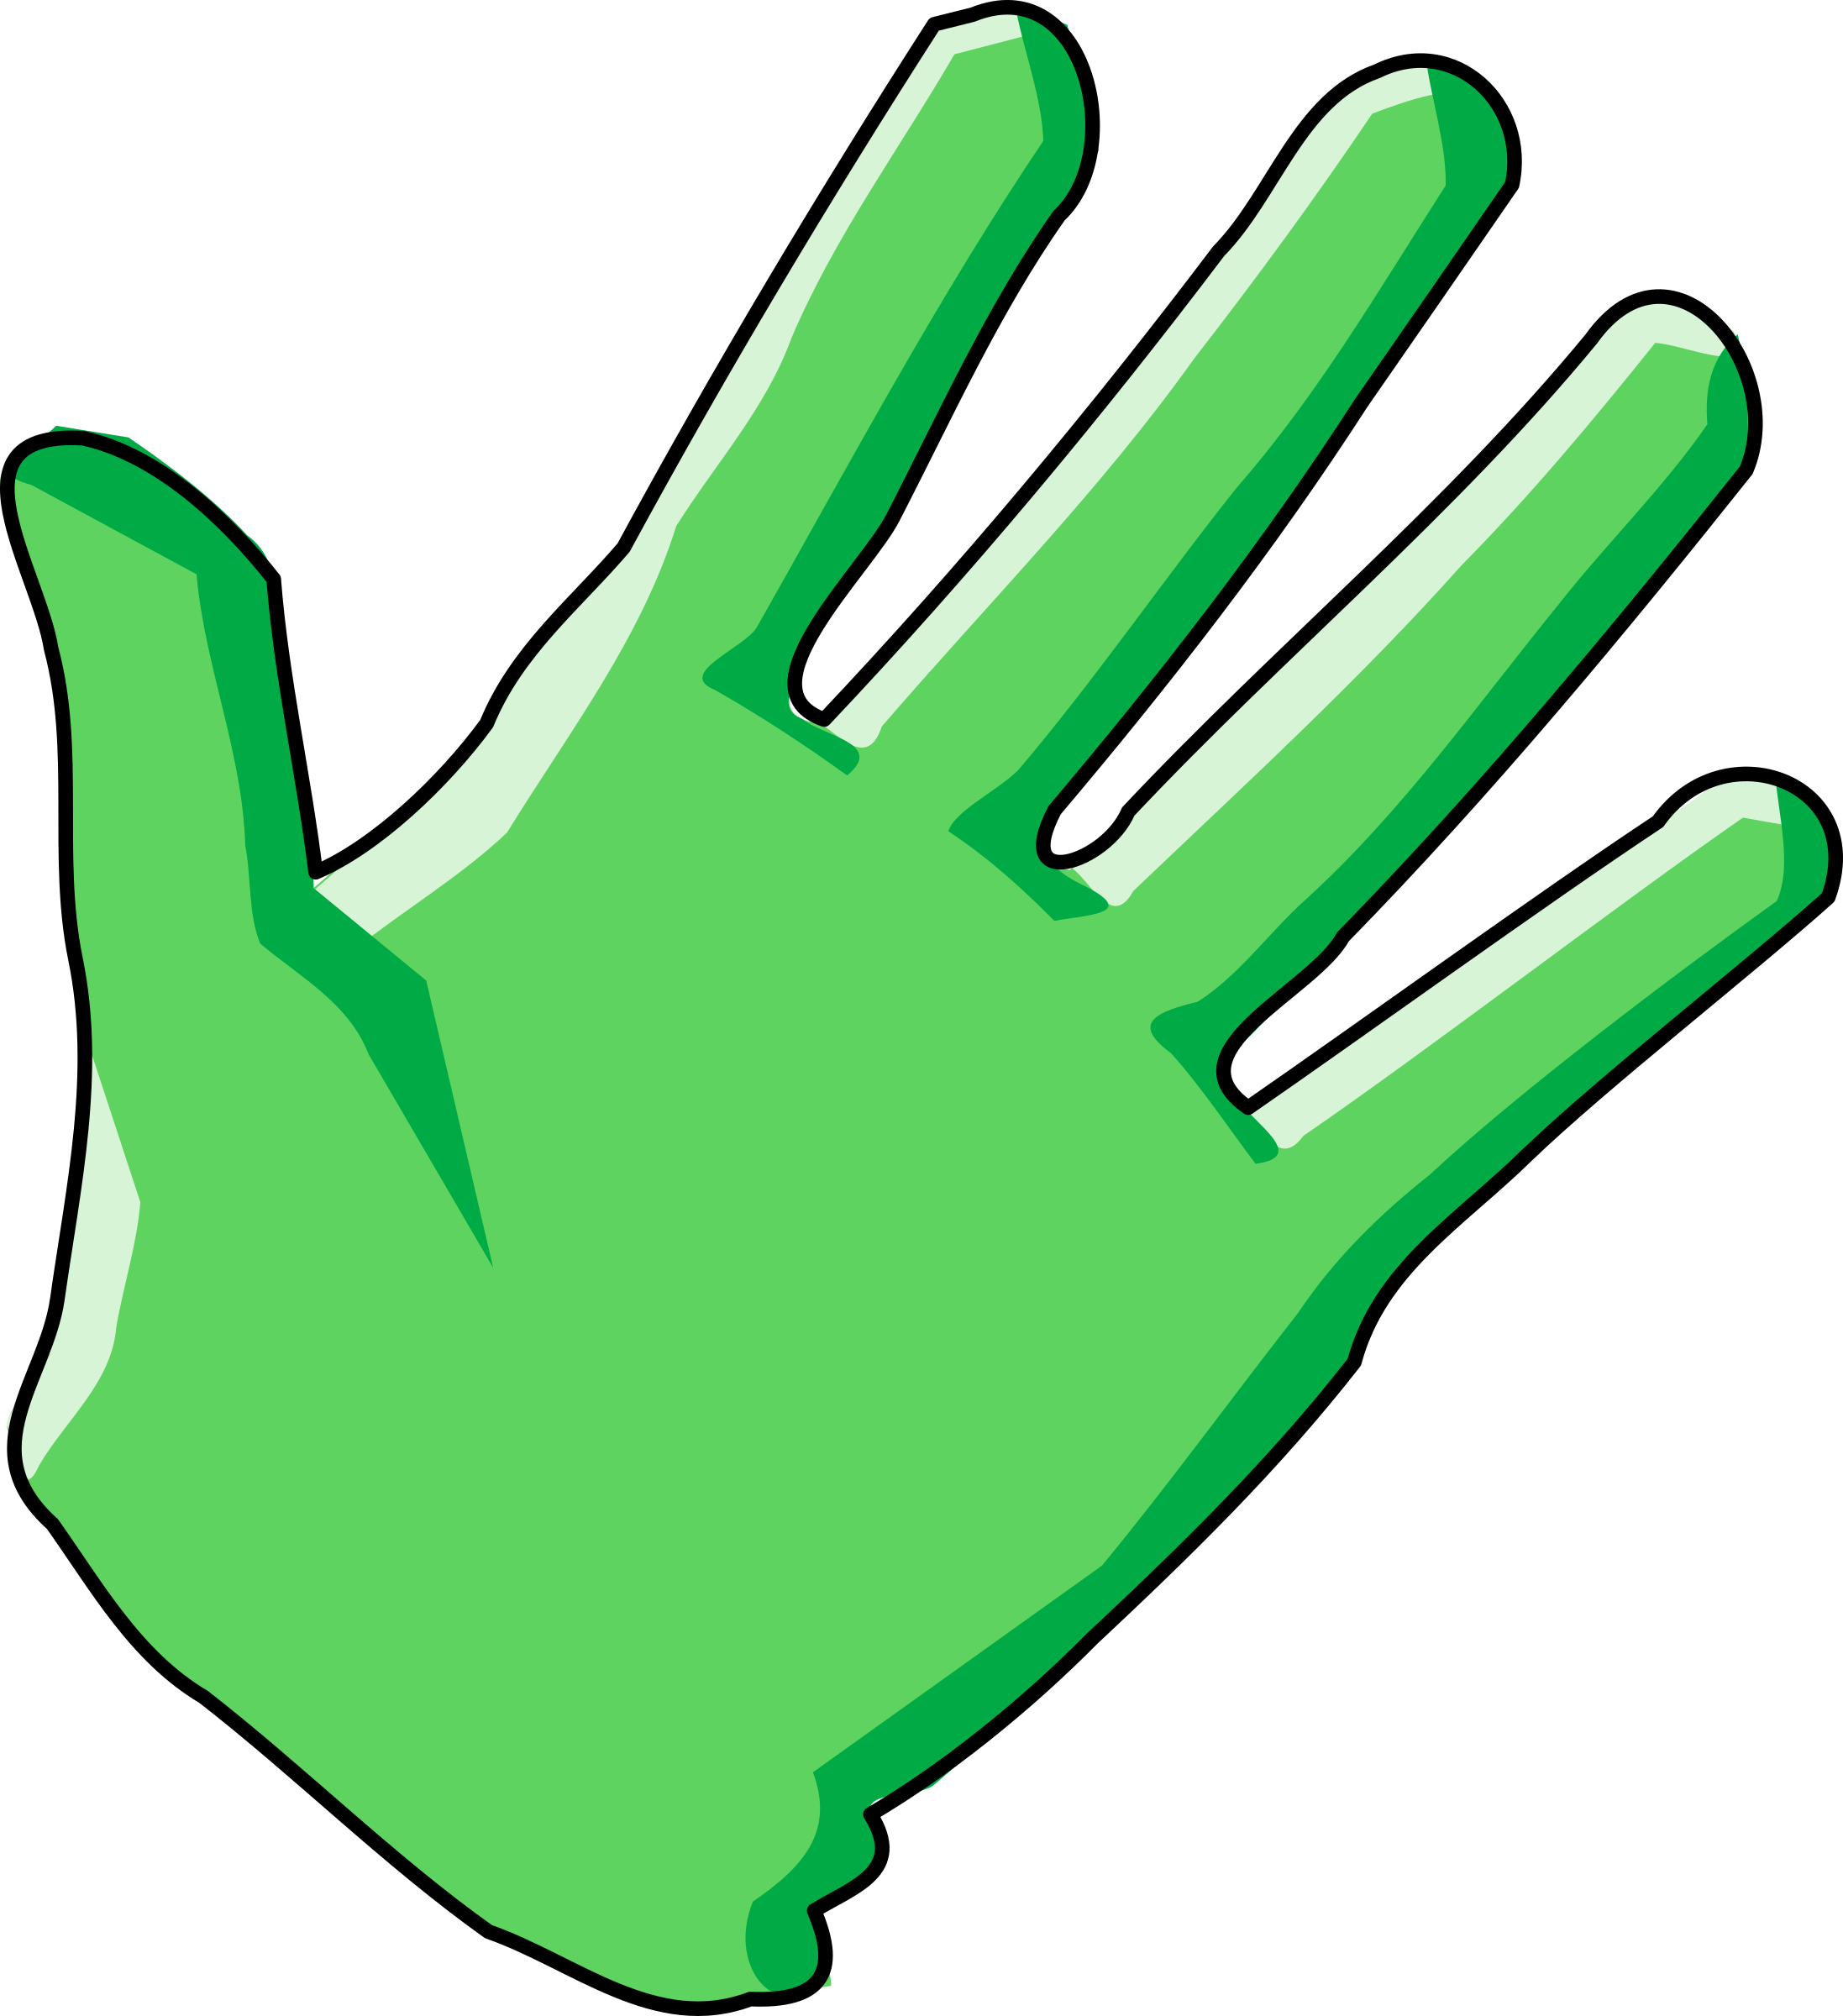 Clipart science glove.